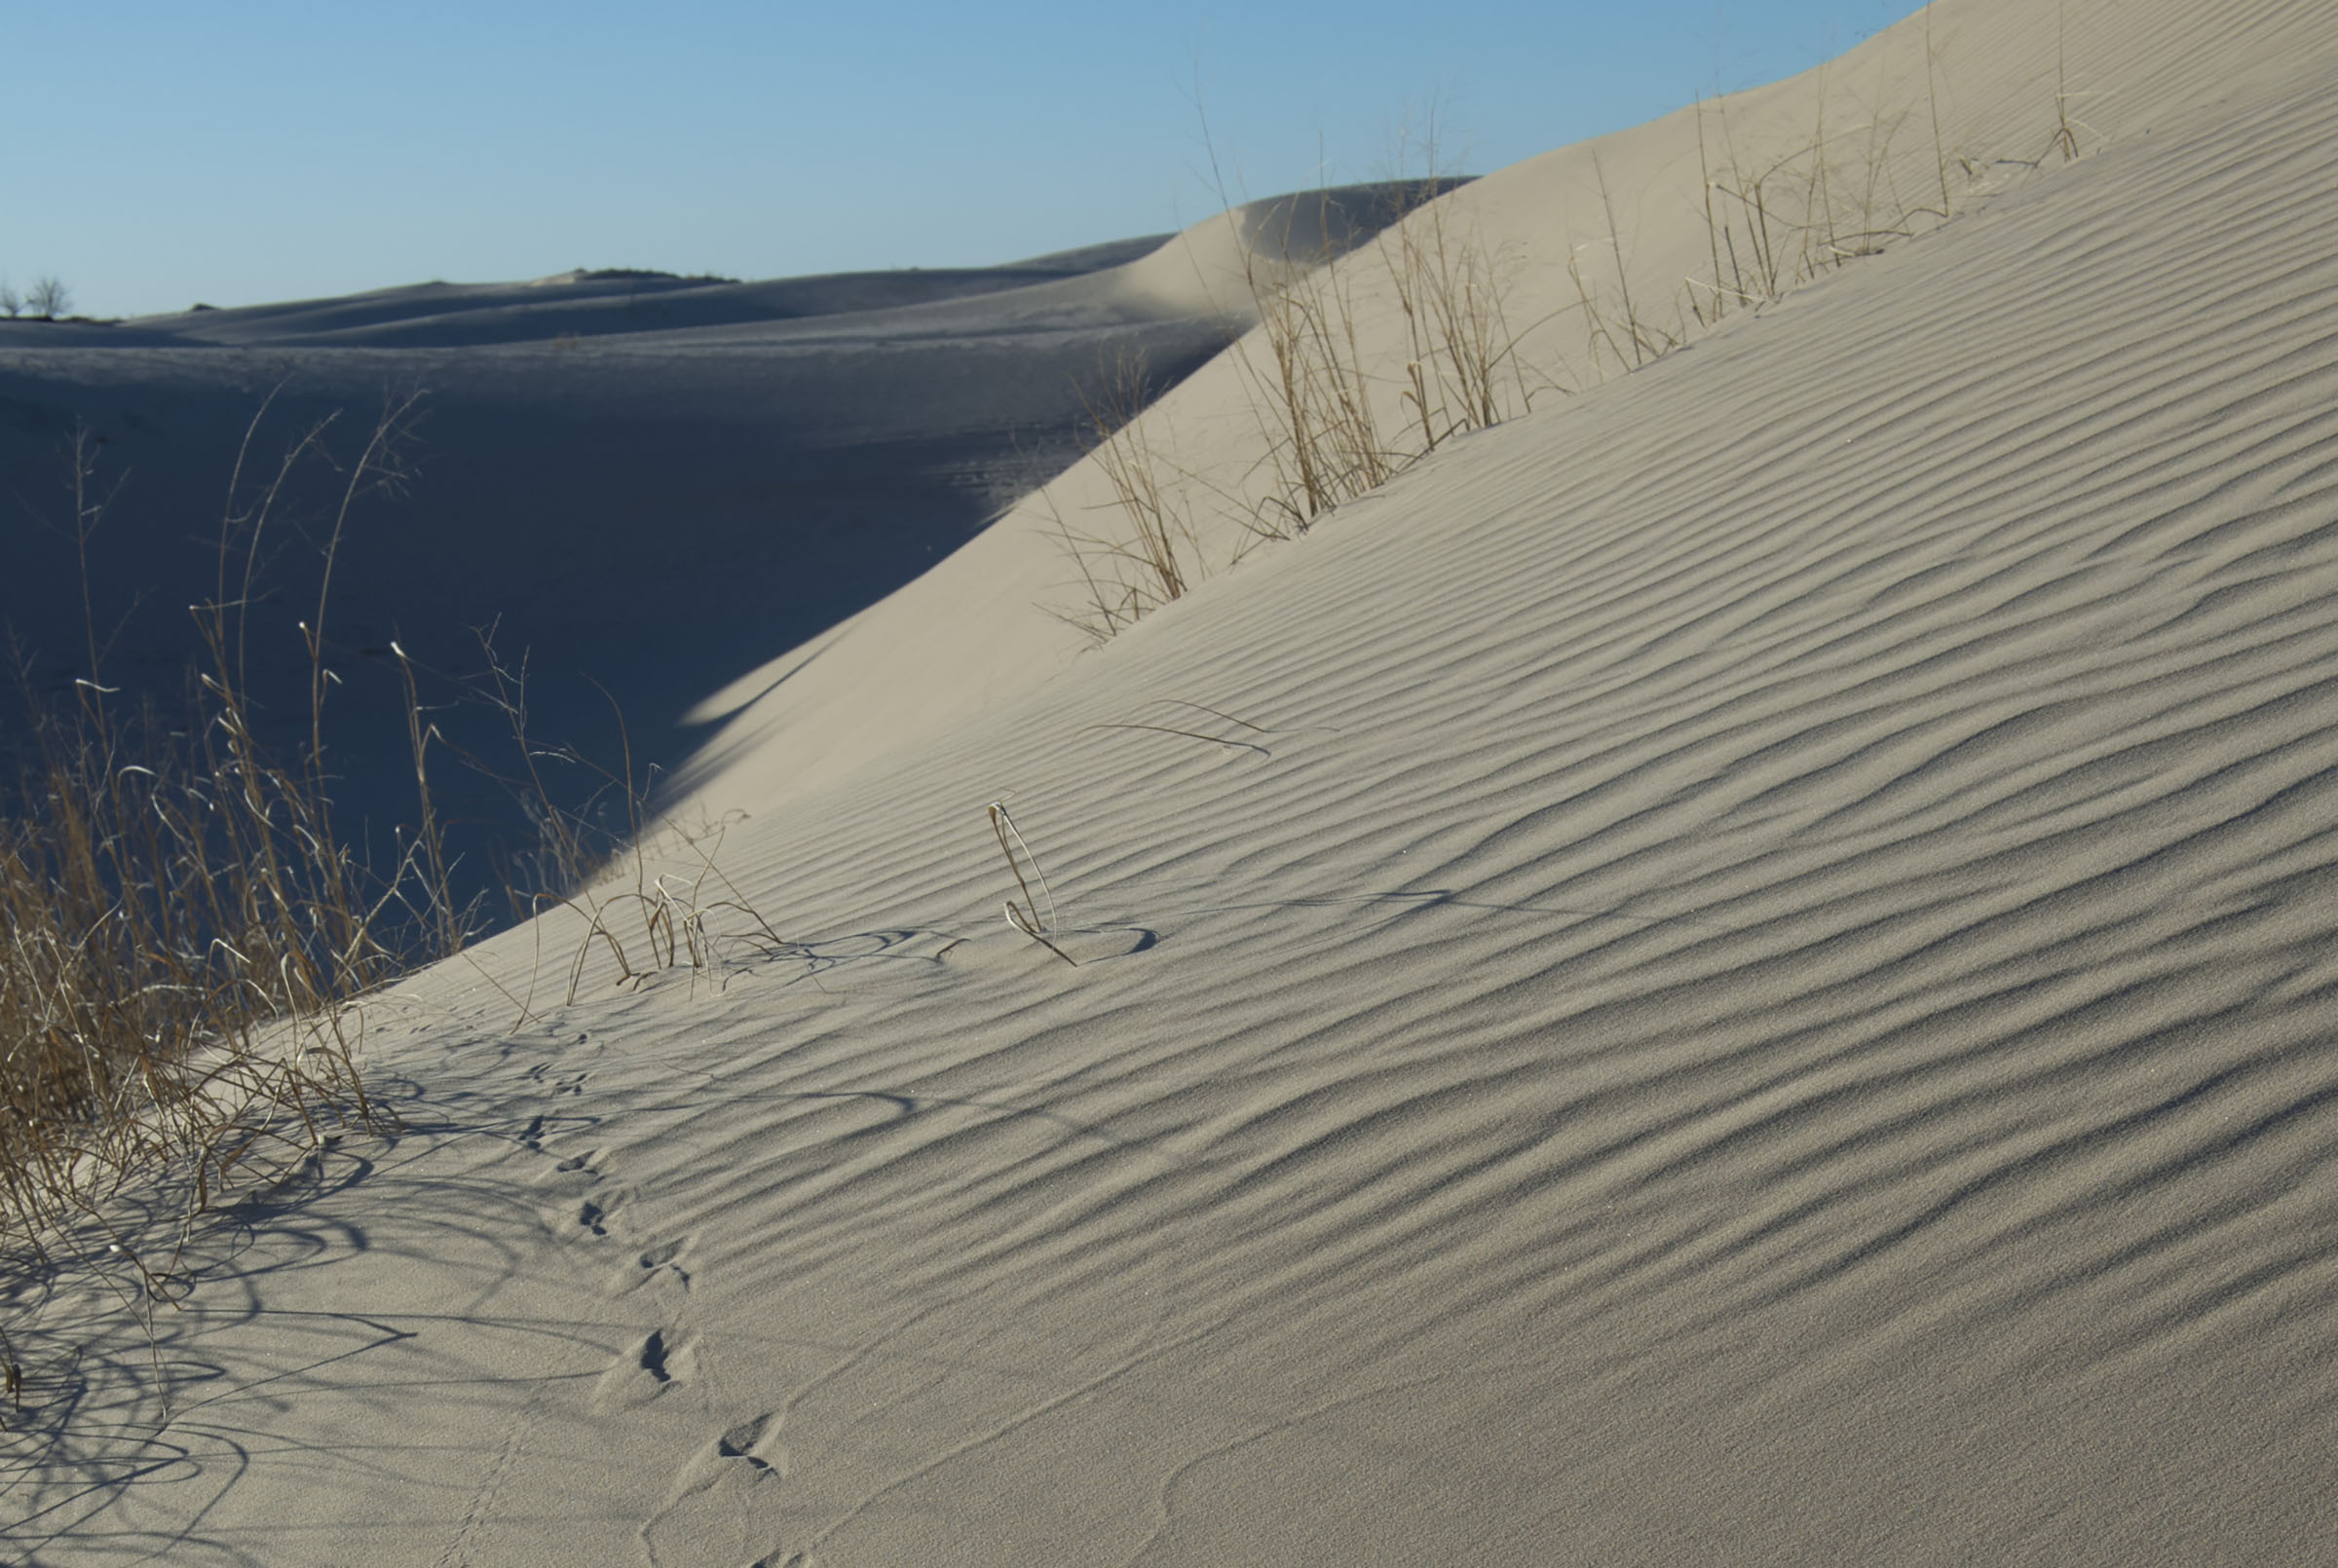 A large sand dune is partially covered in a shadow and small shrub grass